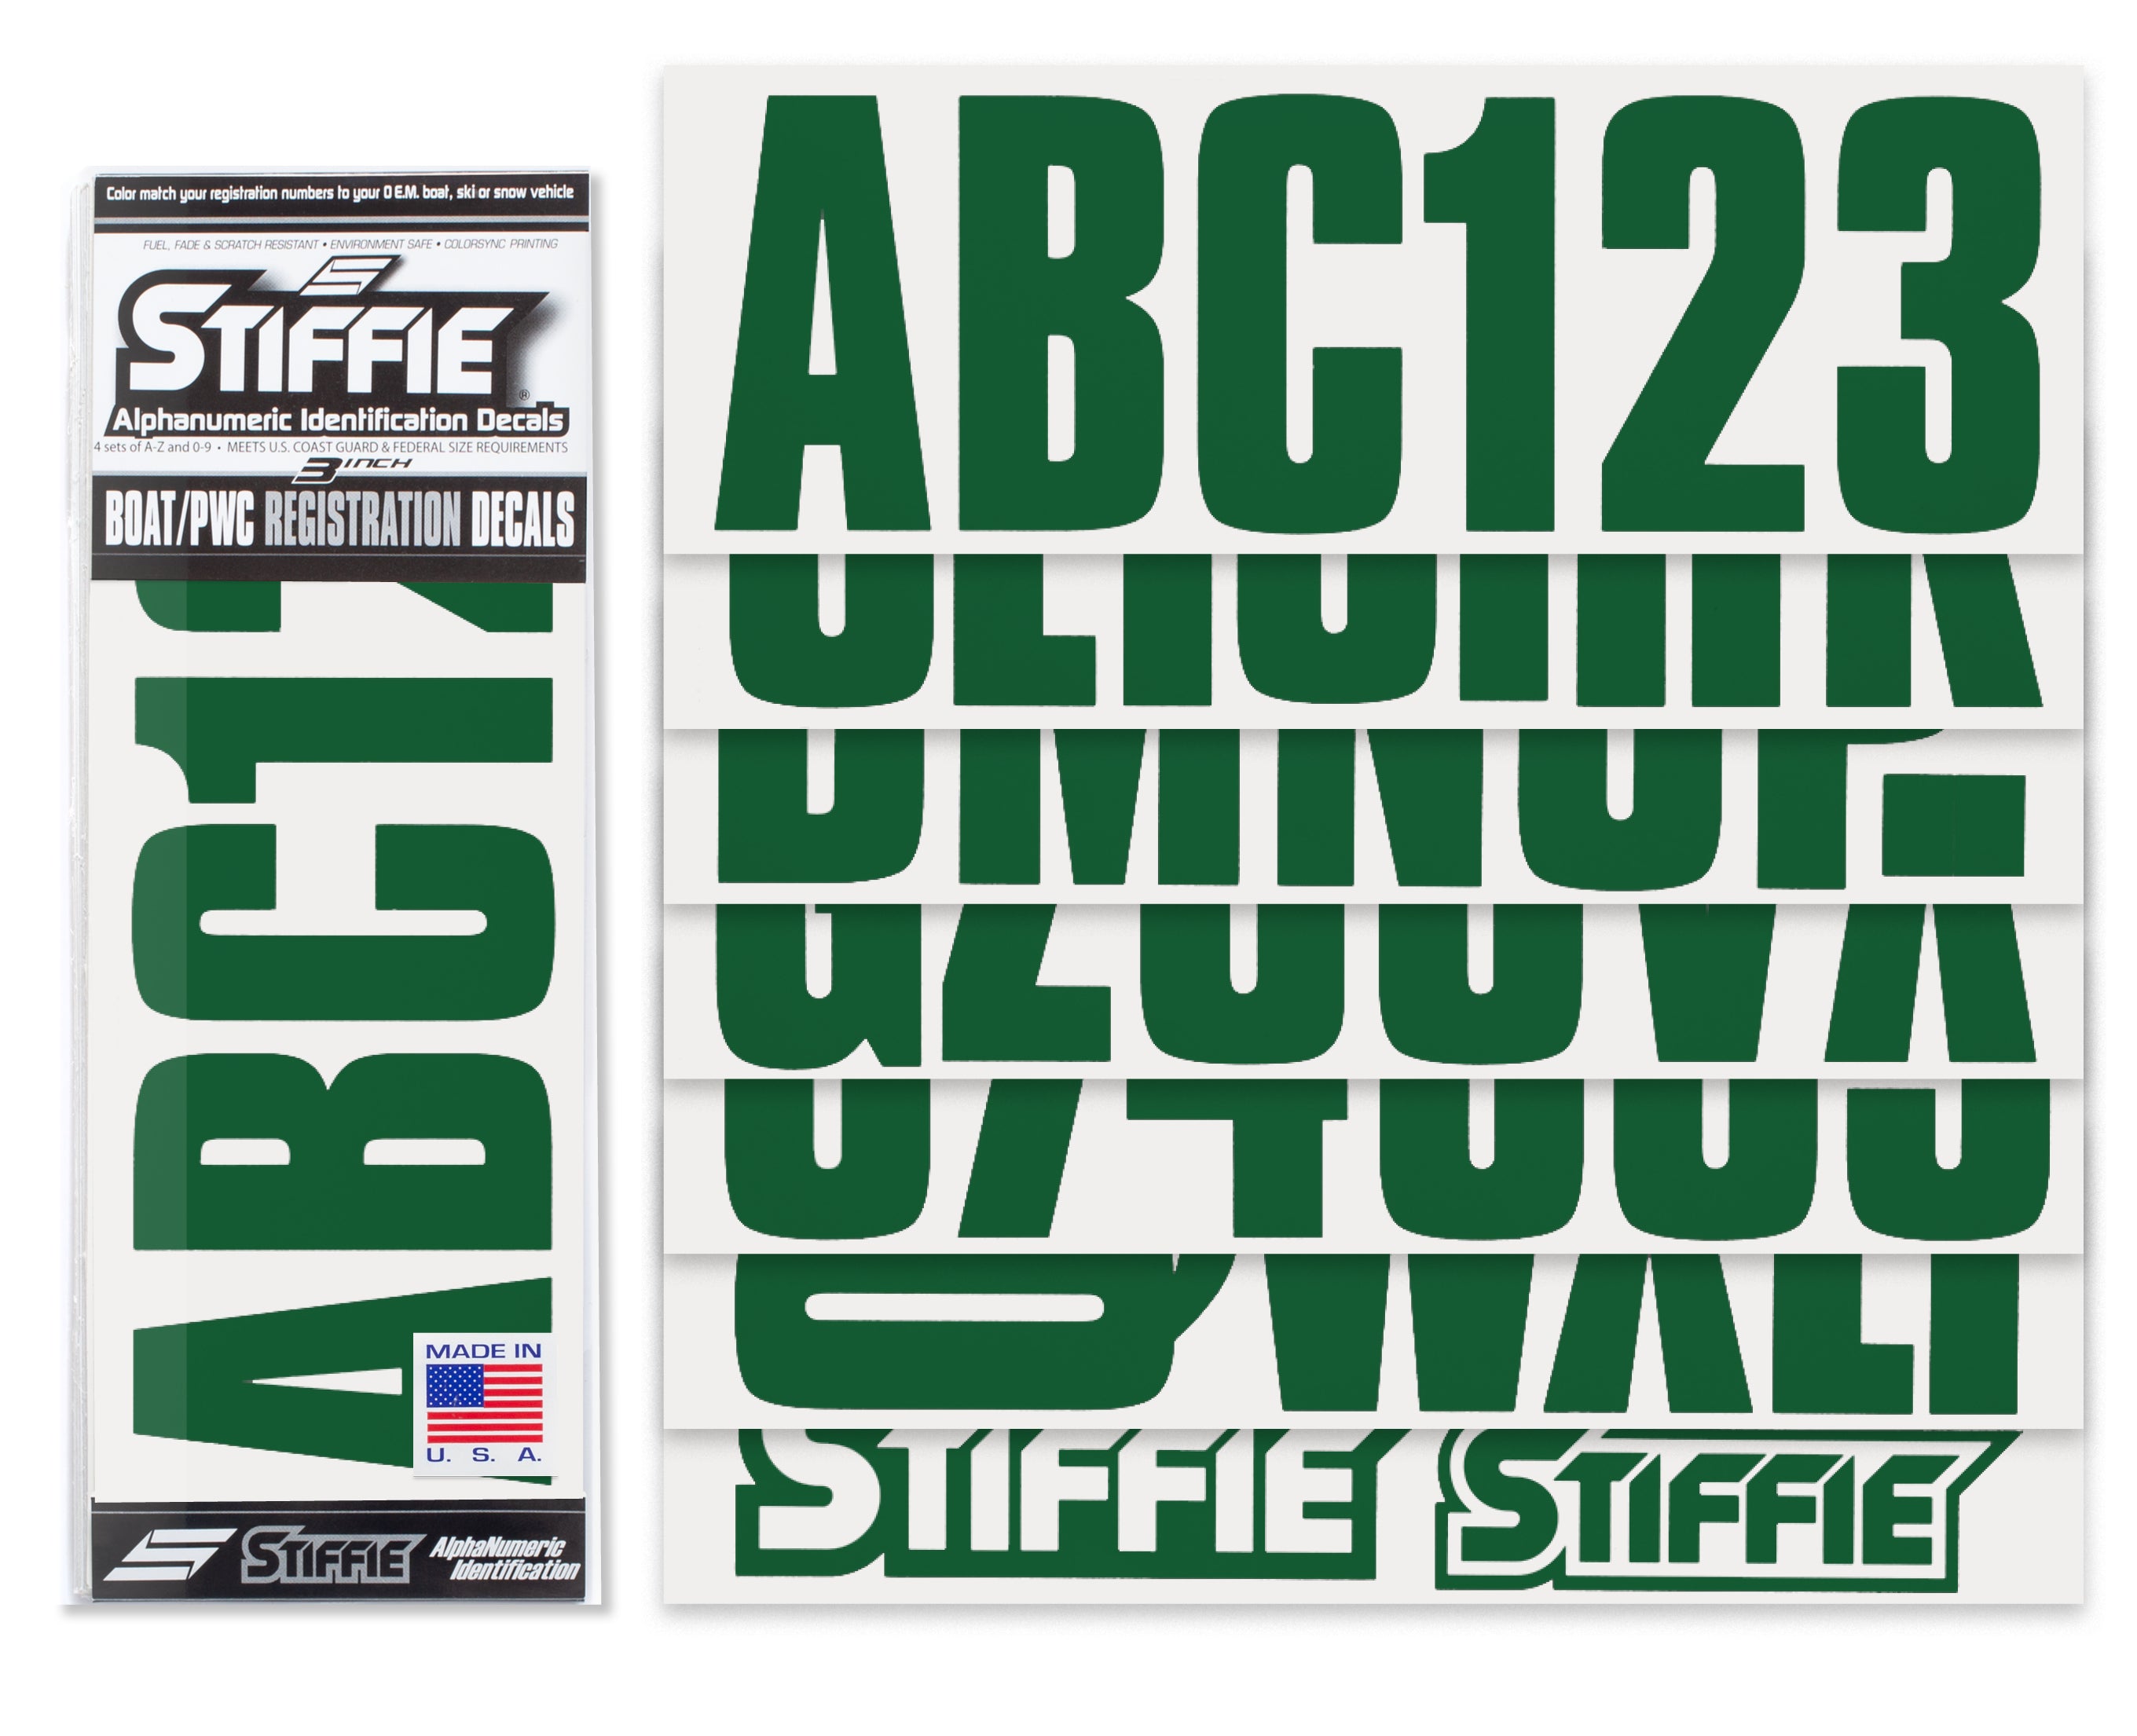 STIFFIE Uniline Racing Green 3" ID Kit Alpha-Numeric Registration Identification Numbers Stickers Decals for Boats & Personal Watercraft